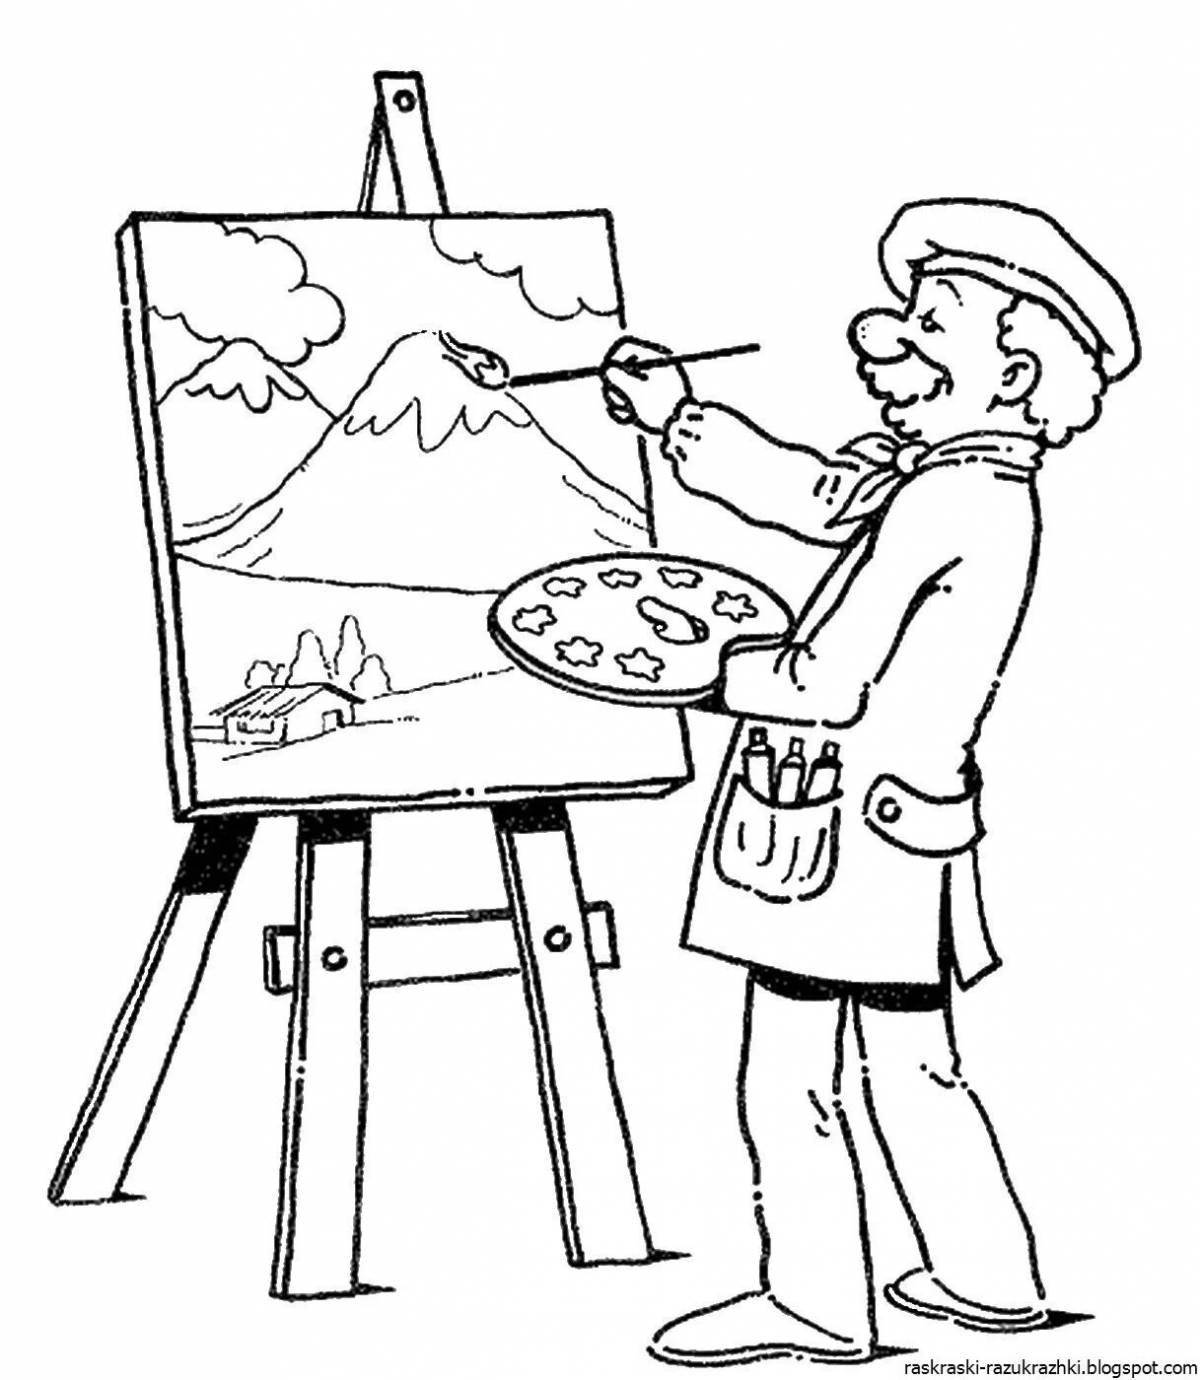 Animated astronomer coloring page